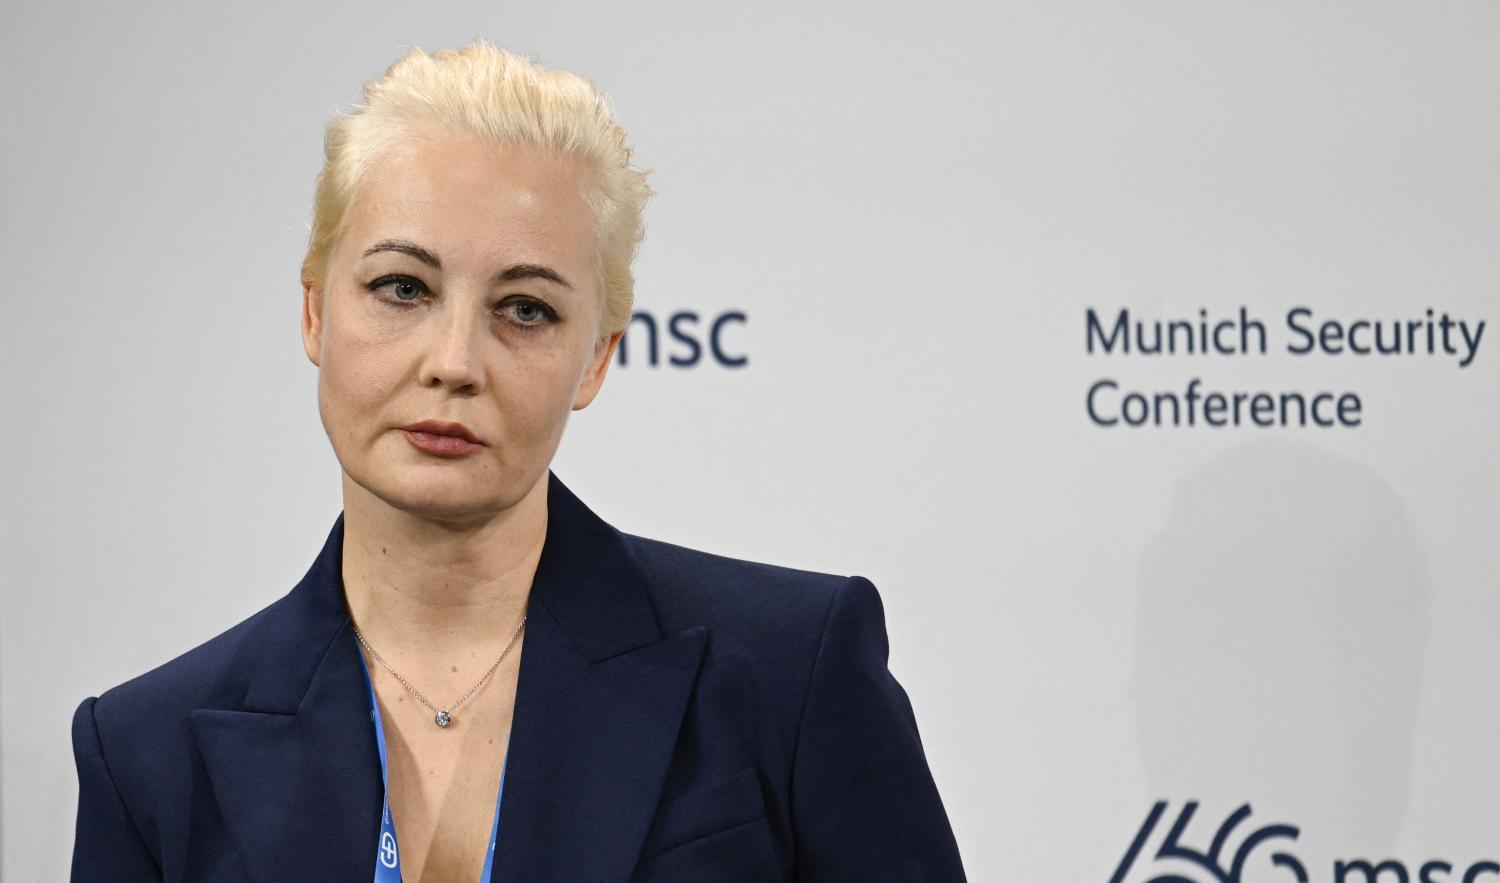 Yulia Navalnaya, wife of late Russian opposition leader Alexei Navalny, attends the Munich Security Conference, on the day Navalny's death was announced (Thomas Kienzle/AFP via Getty Images)